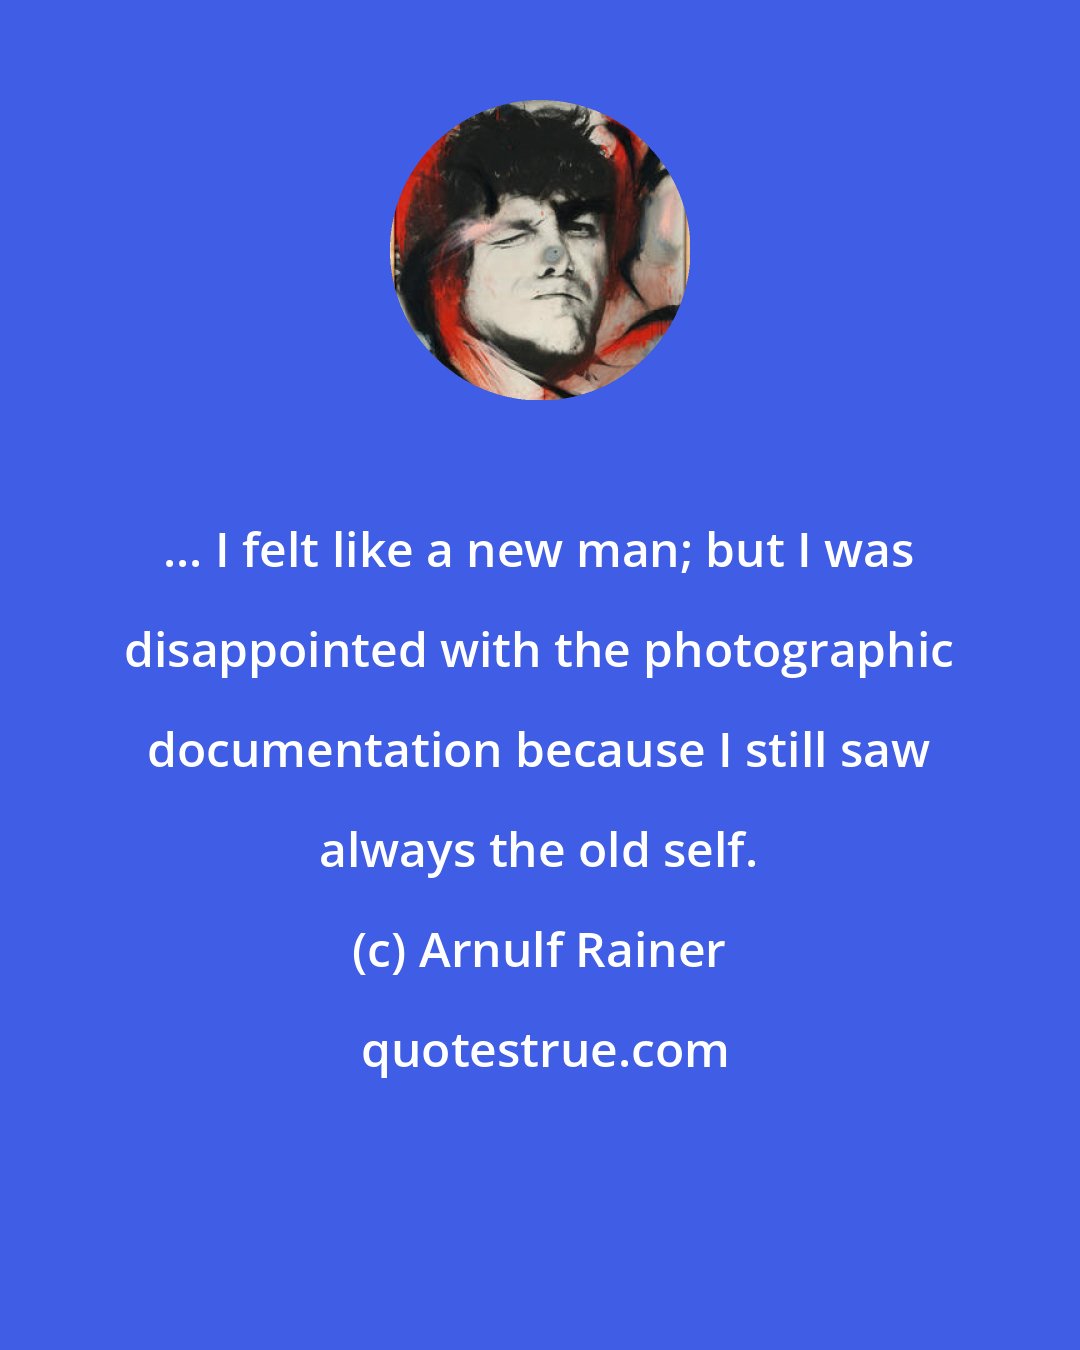 Arnulf Rainer: ... I felt like a new man; but I was disappointed with the photographic documentation because I still saw always the old self.